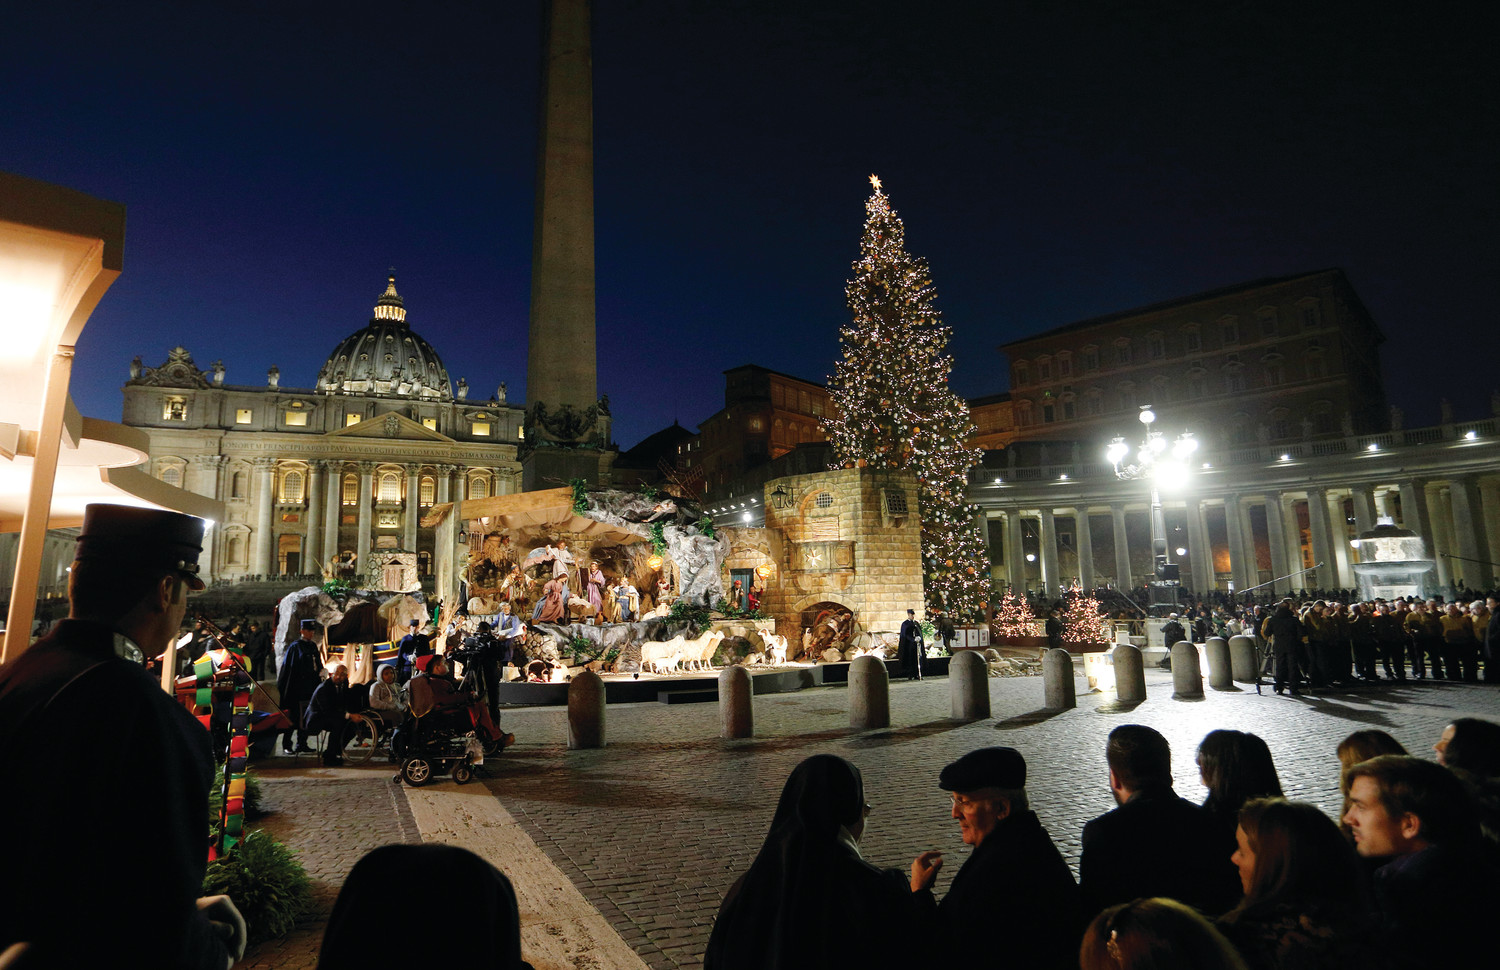 The Christmas tree and Nativity scene are pictured in St. Peter's Square after a lighting ceremony at the Vatican Dec. 9, 2016.